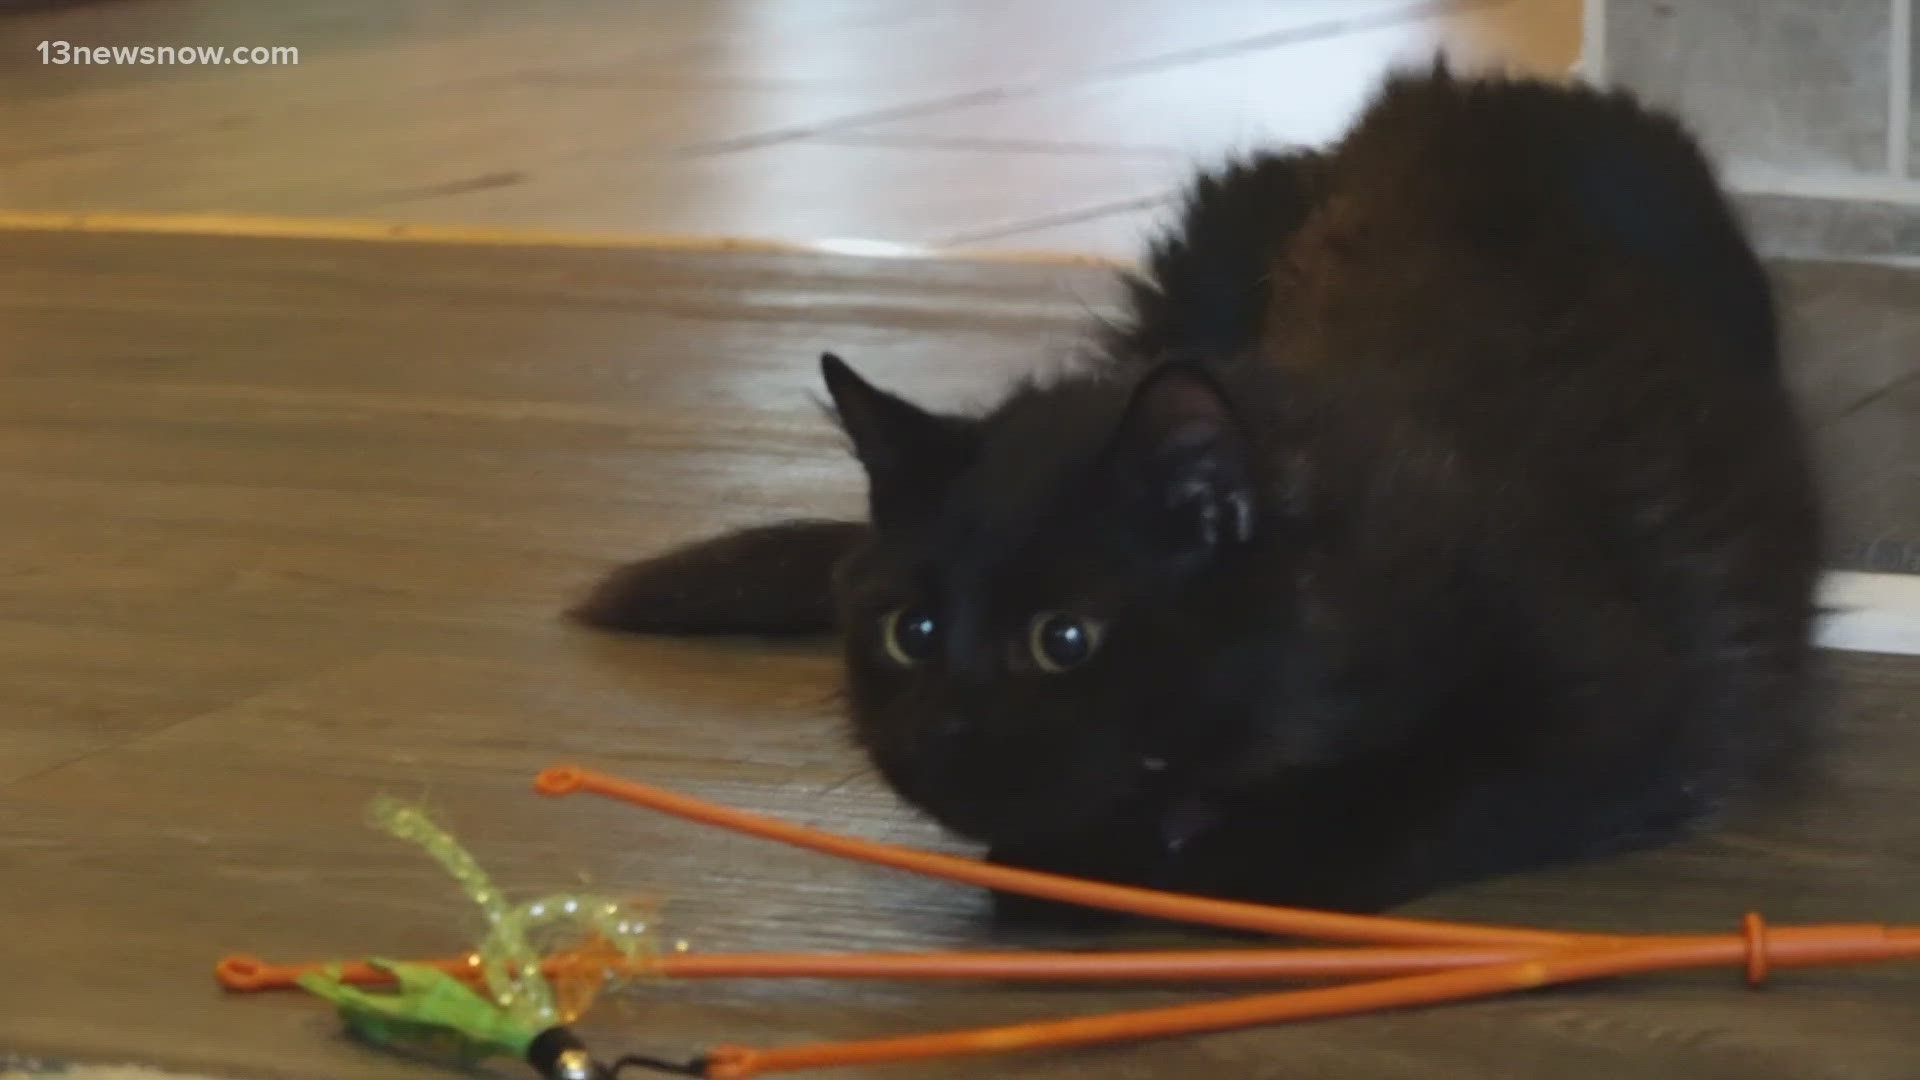 Pisa, a nine-month-old kitten, is living with his new family in Virginia Beach following days of living in the earthquake rubble.